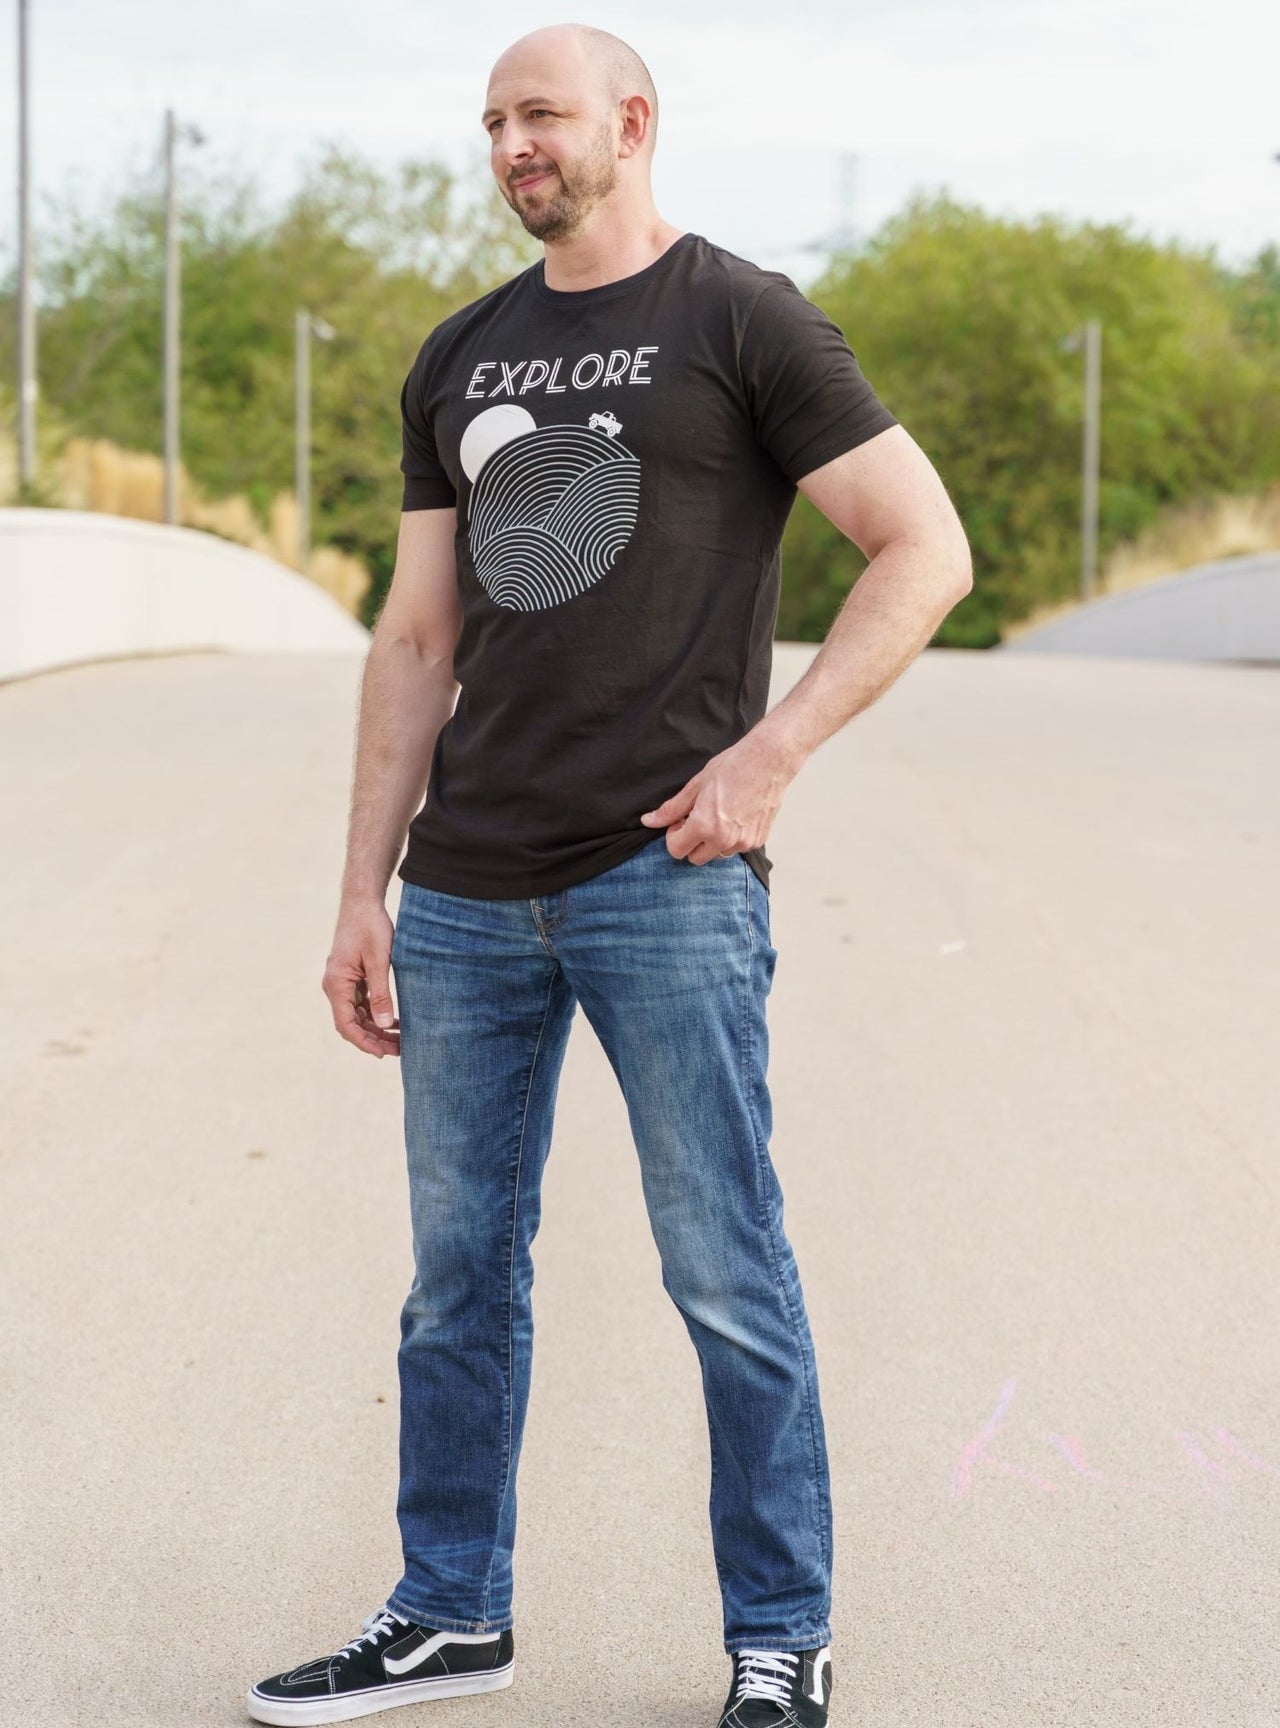 A head to toe shot of a tall skinny guy wearing a tall black graphic t-shirt.